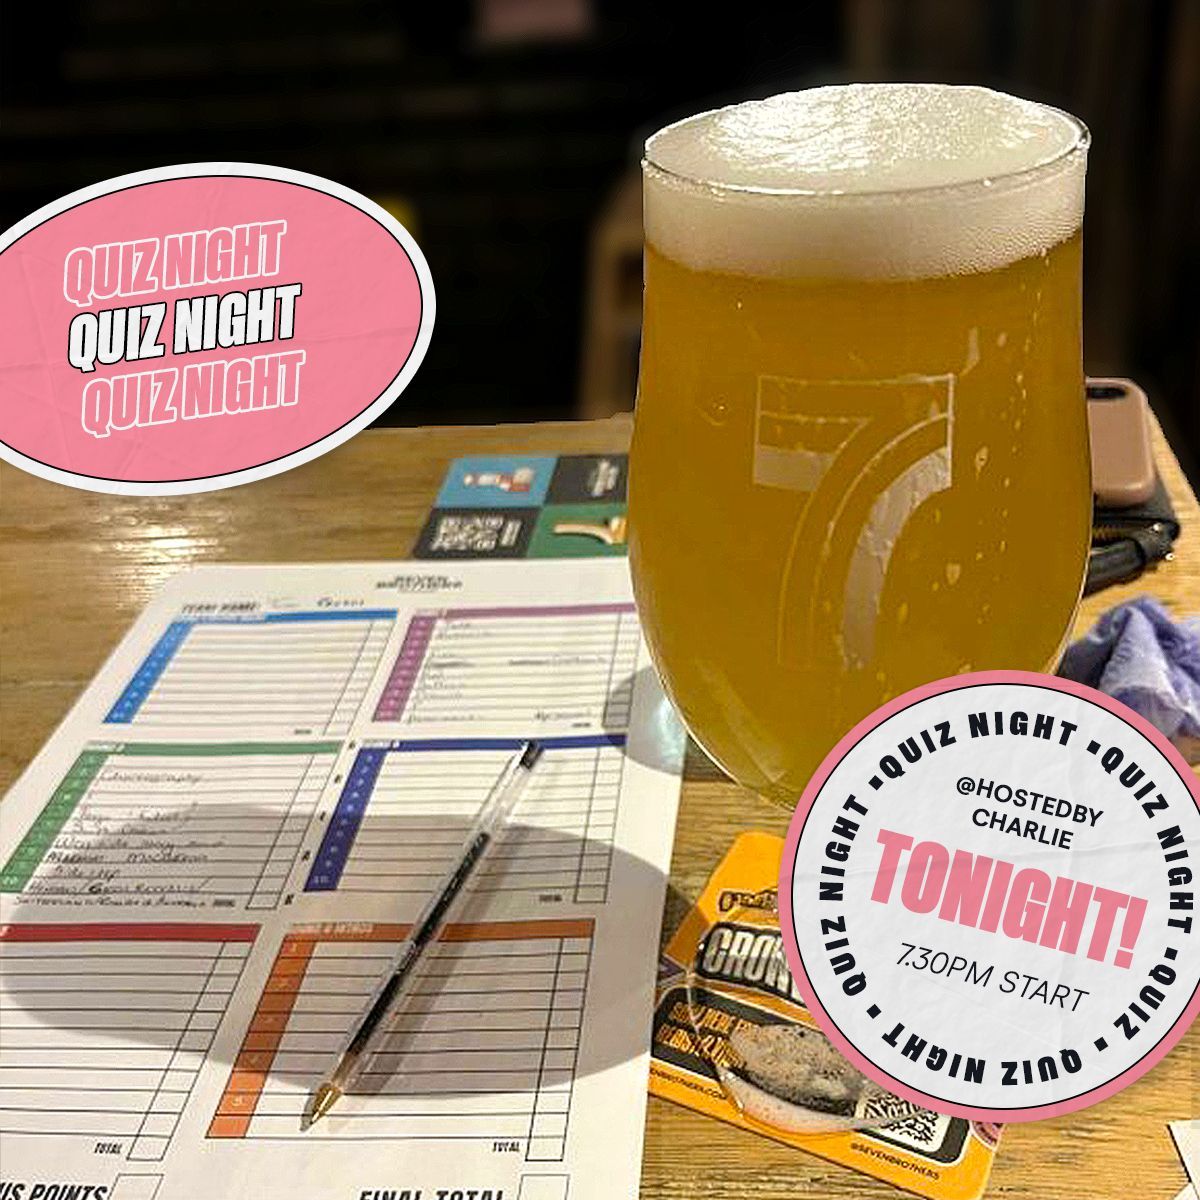 Get those cogs turning in tonight's Quiz Night at our Middlewood Locks Beerhouse ! ⚙️ We'll be kicking off the quizzing at 7.30pm and we'll be open from 4 so make sure to pop down early to save your seats and tuck into some delicious food with a few pints...